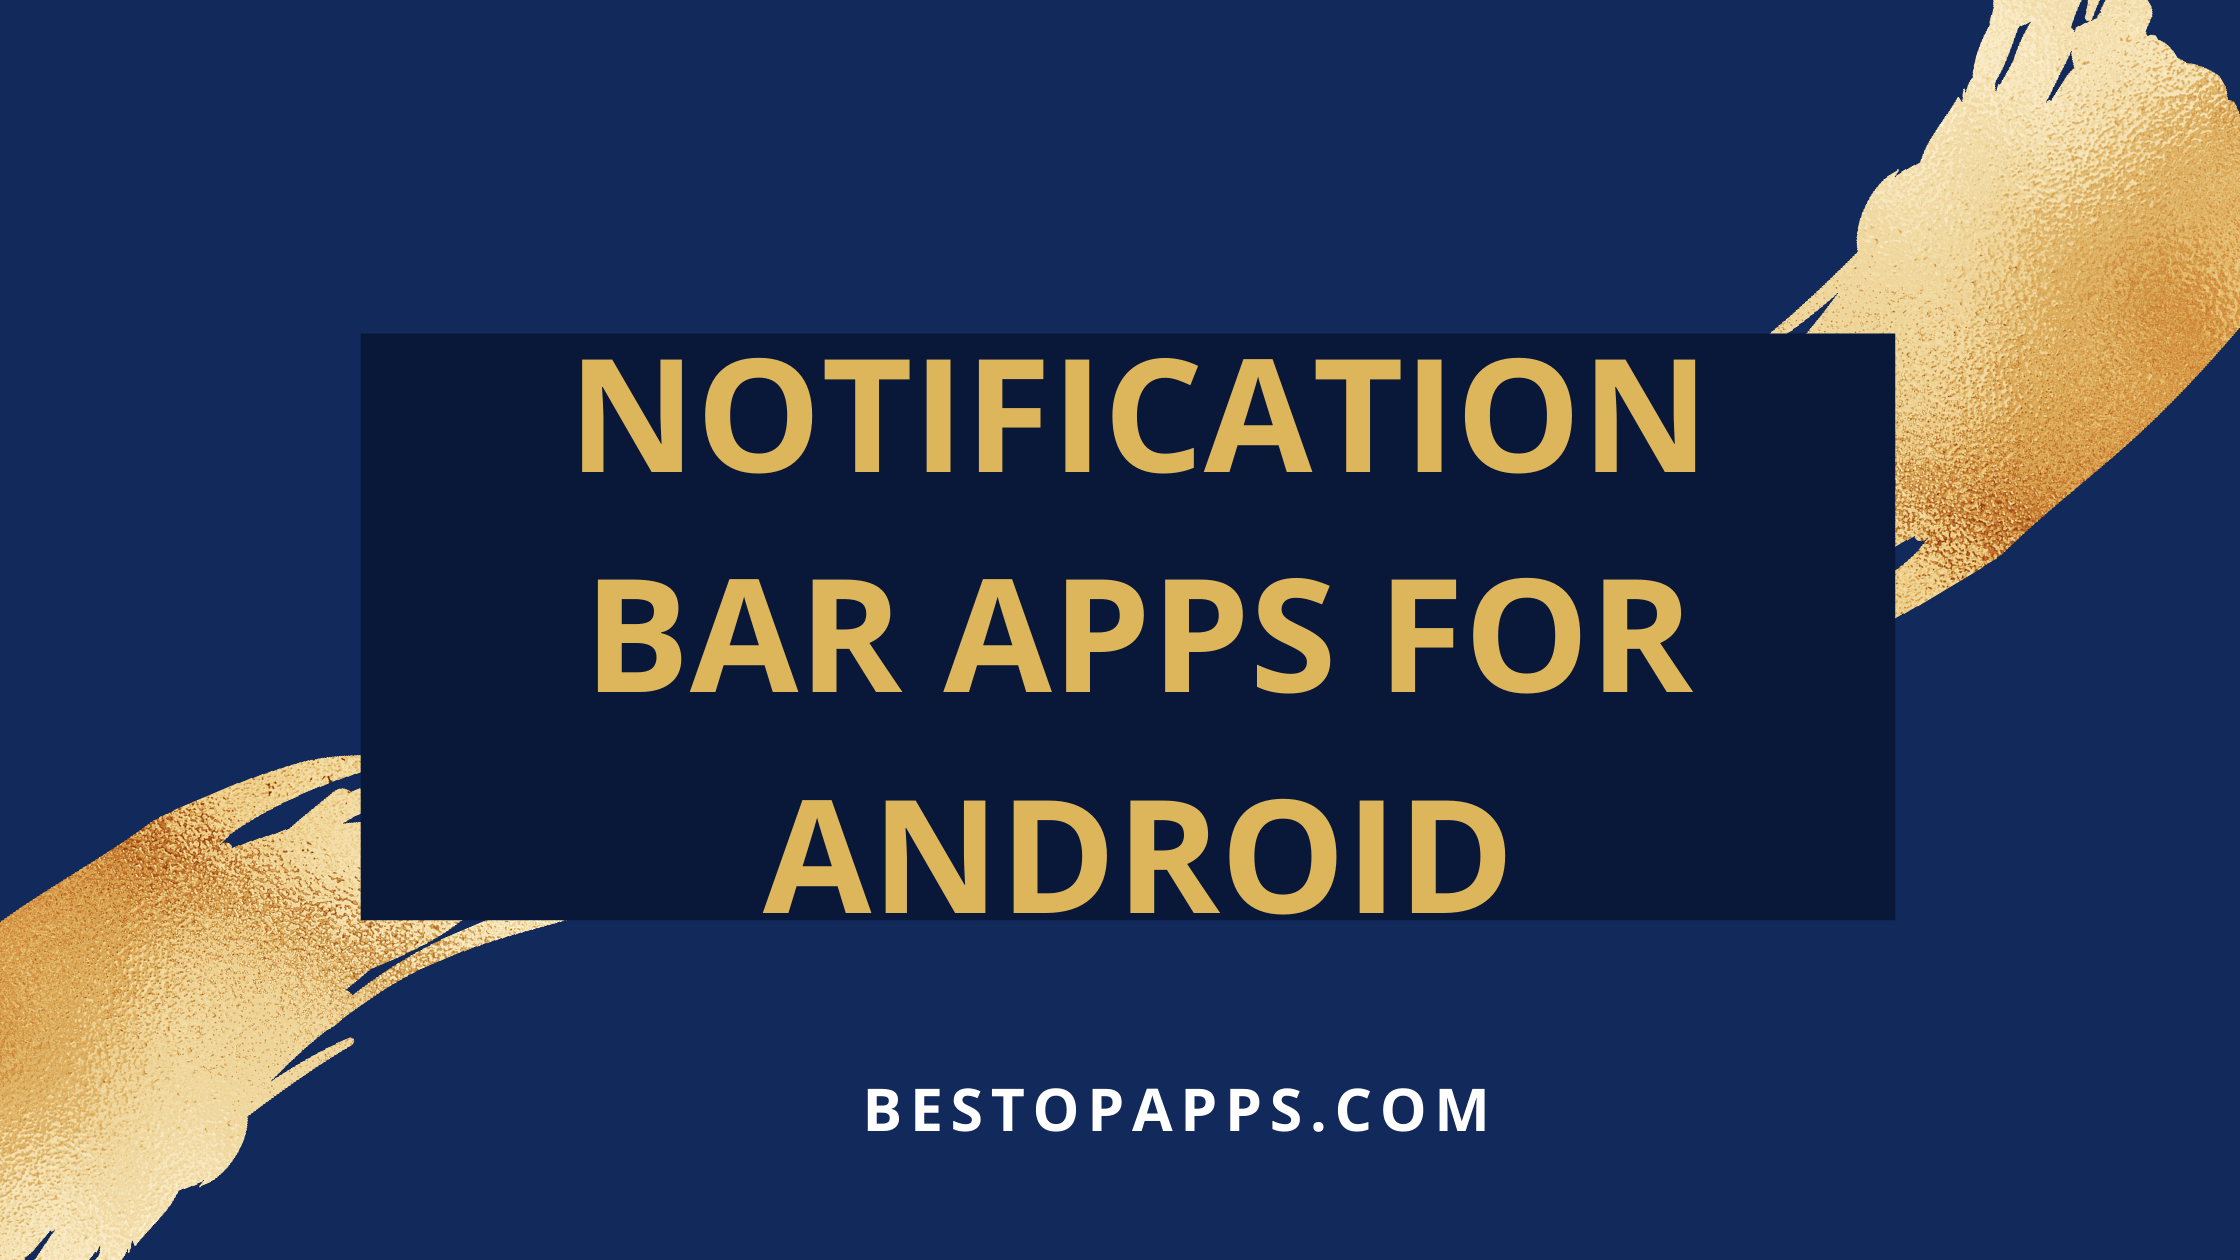 NOTIFICATION BAR APPS FOR ANDROID